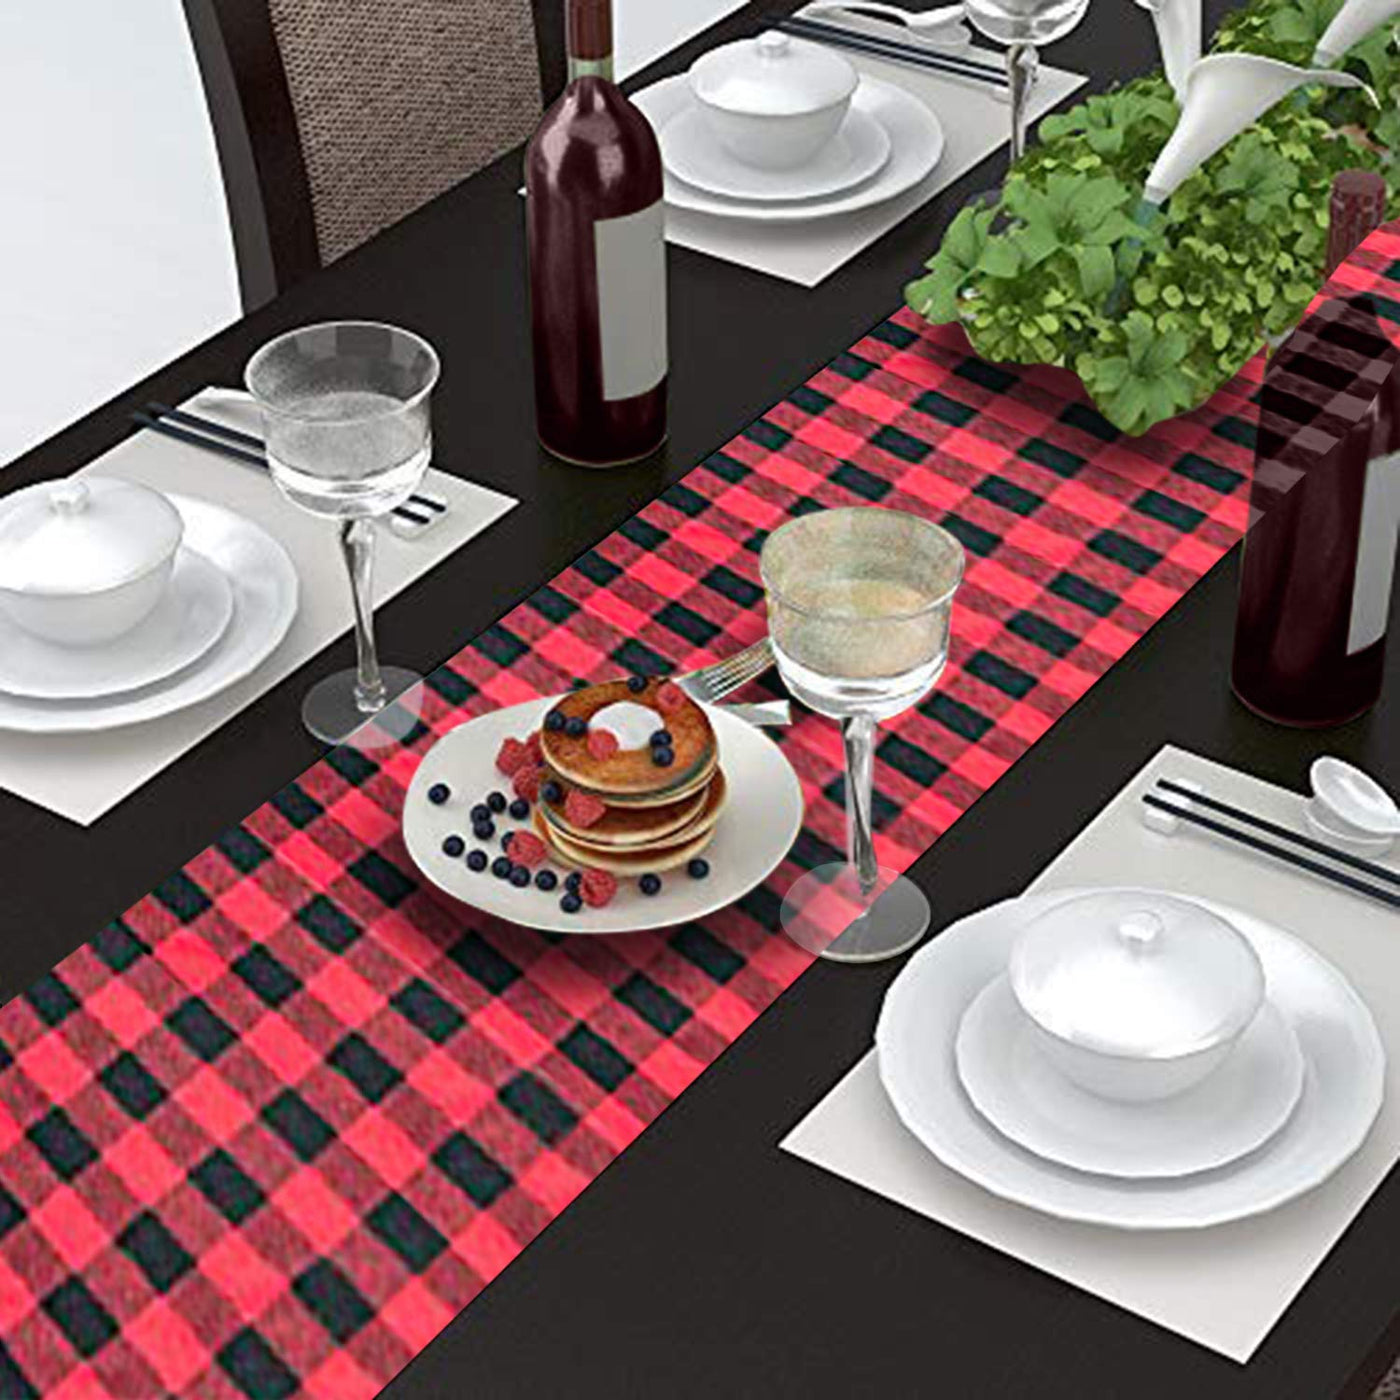 AAYU Red and Black Buffalo Plaid Table Runner 14 x 108 Inch Plaid Table Runner for Everyday Party Wedding Table Settings